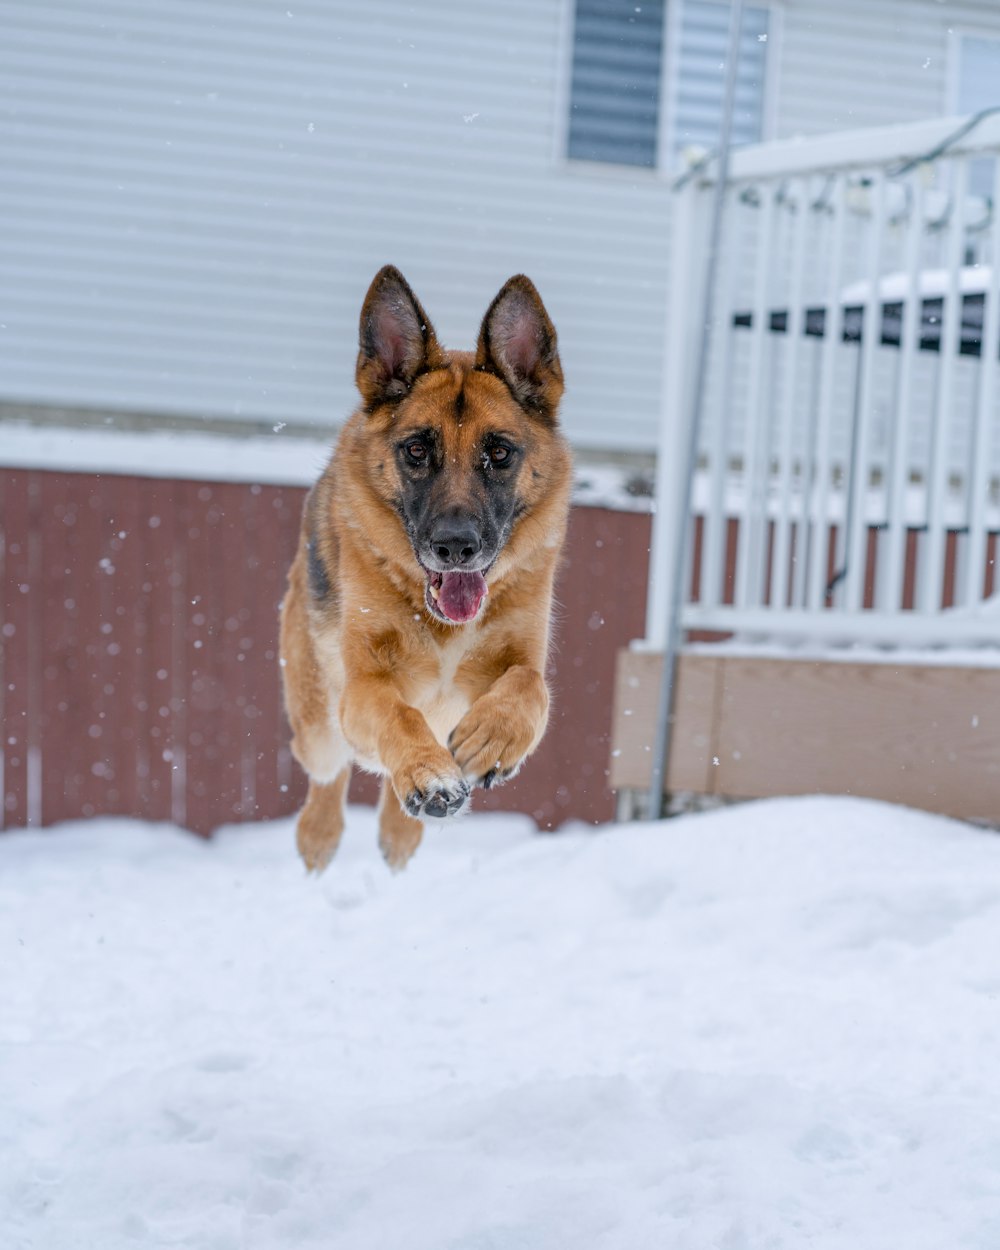 a dog jumping up into the air in the snow